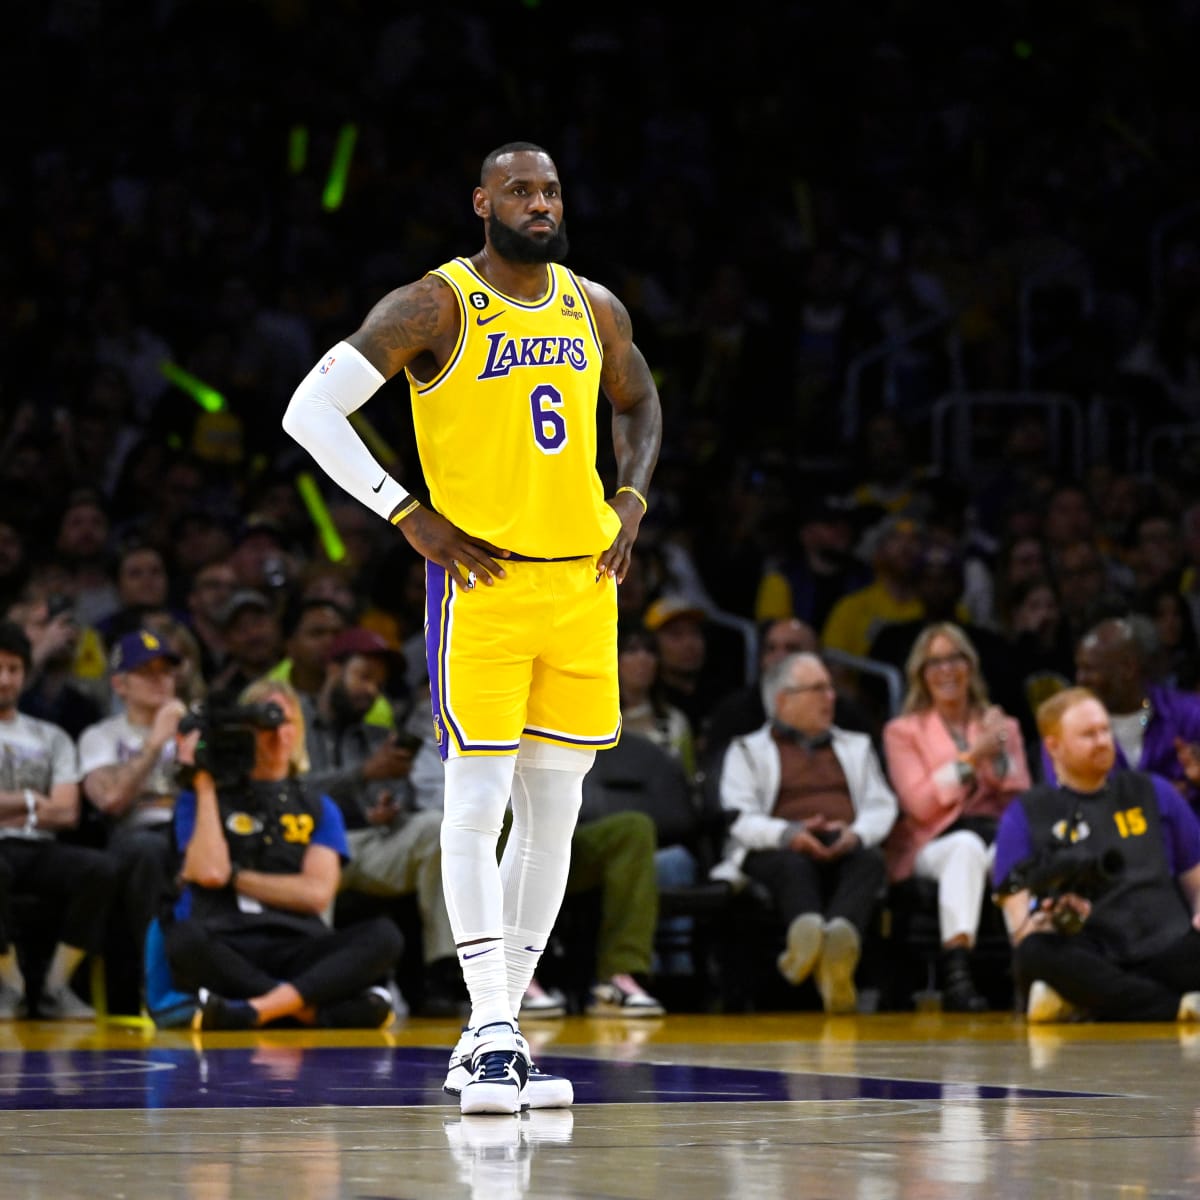 LeBron James' New Lakers 'Showtime' Jersey Revealed for Next